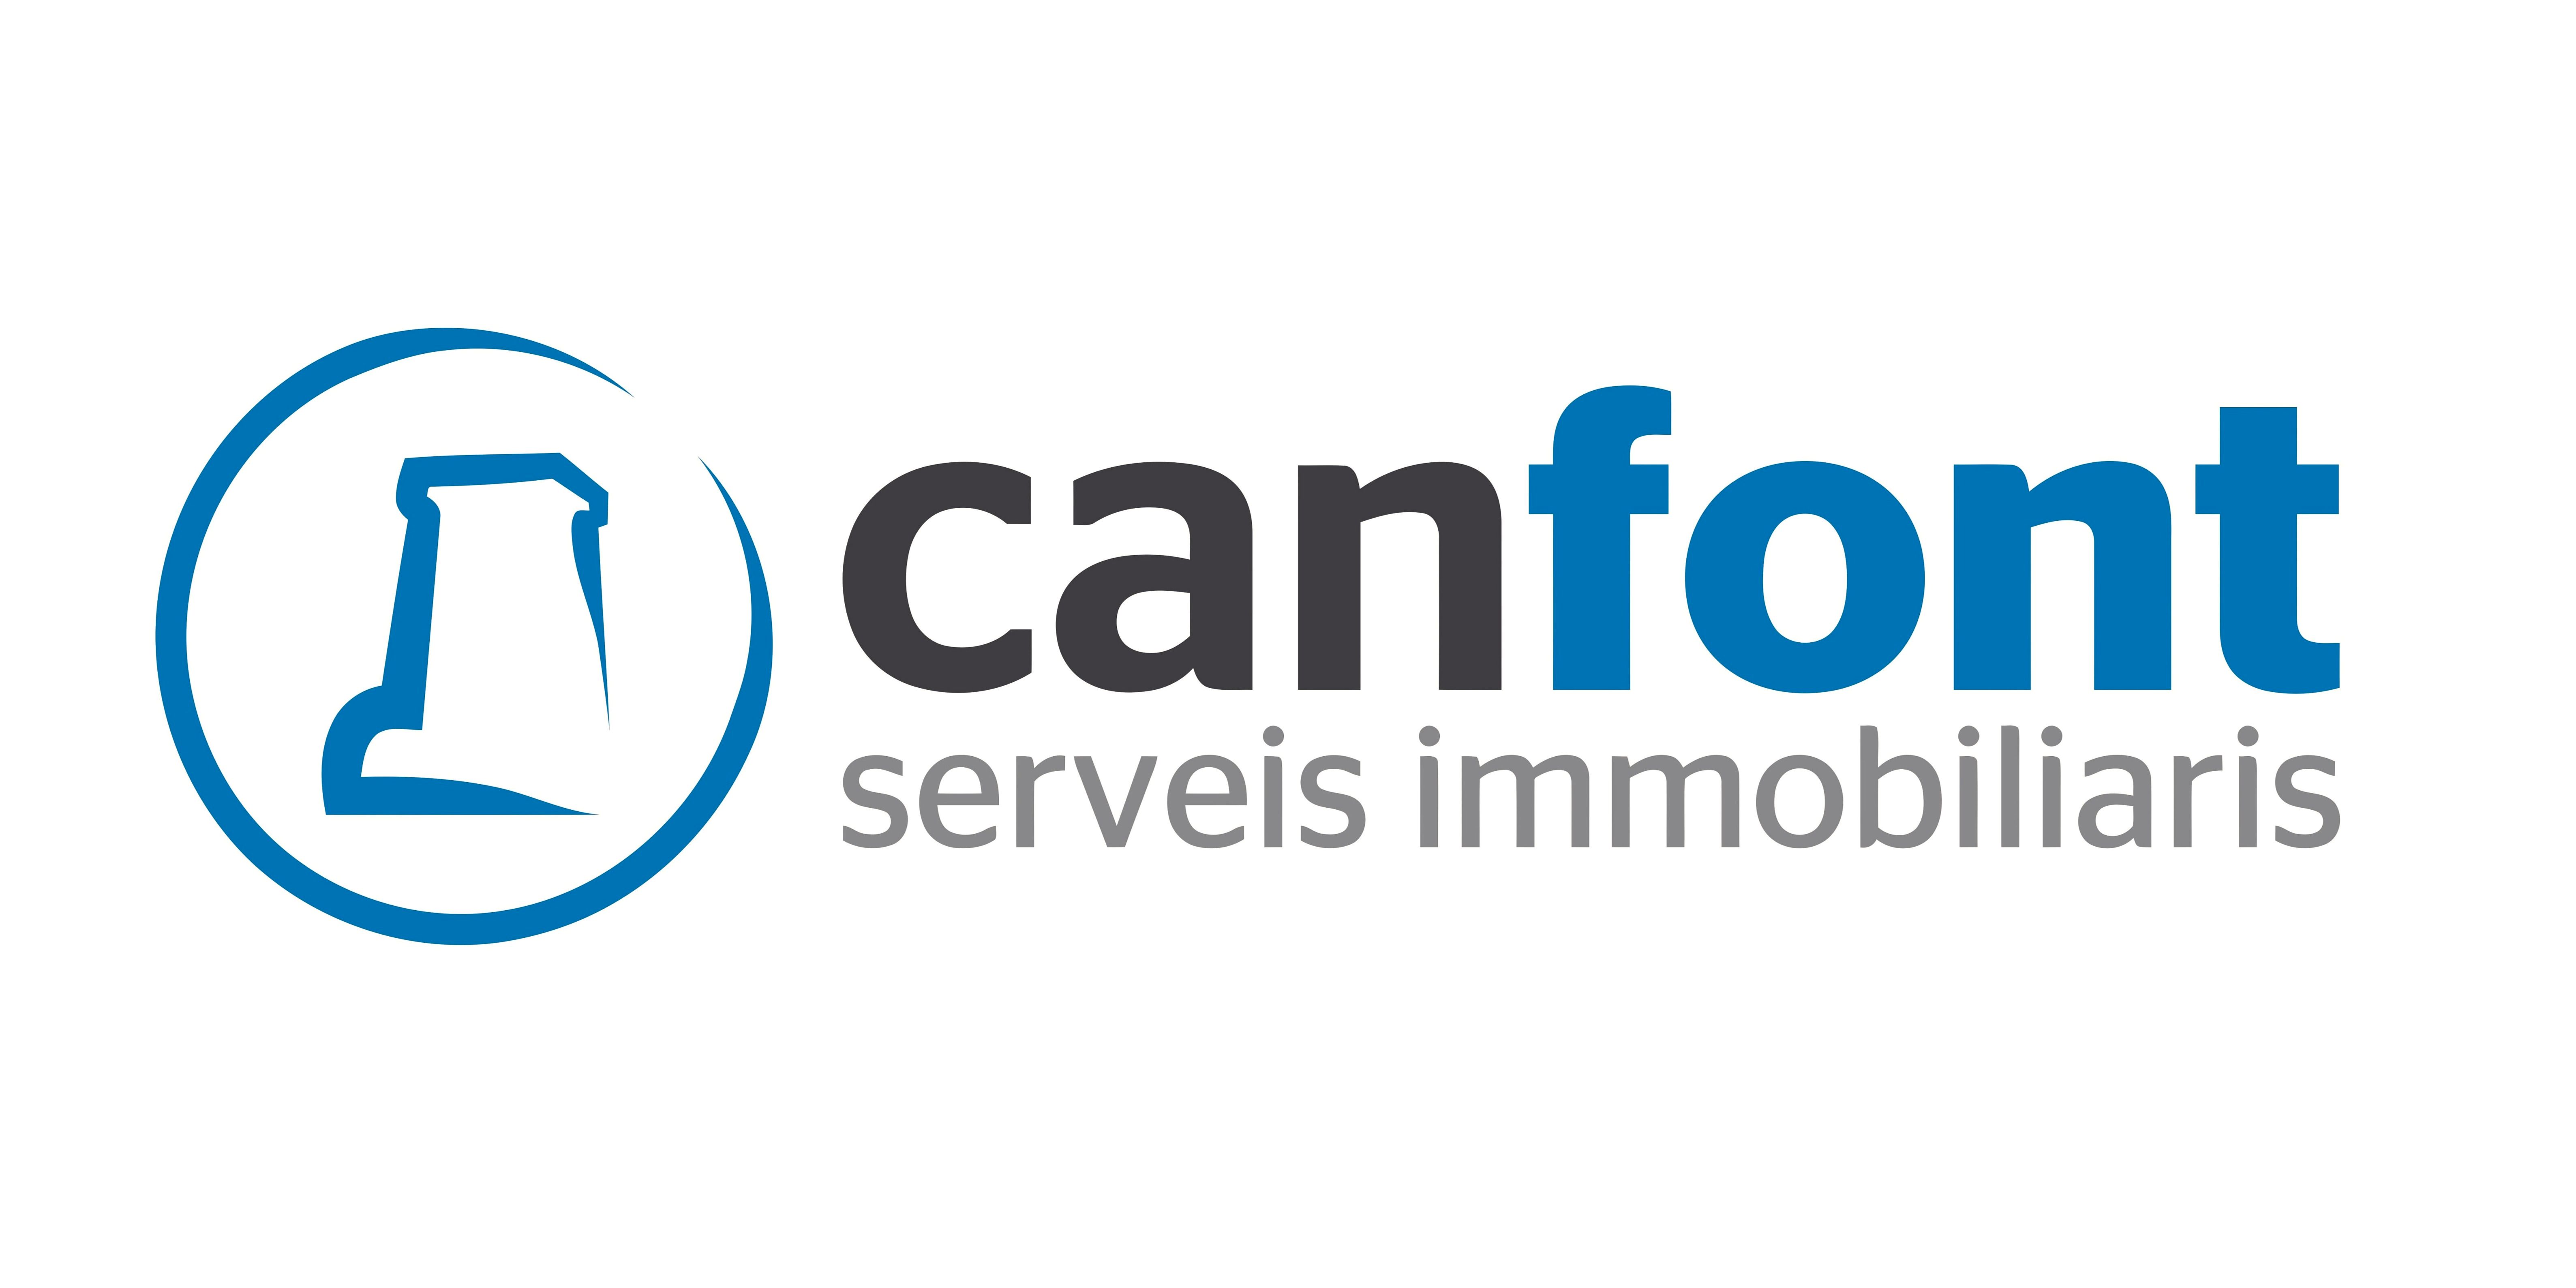 CAN FONT SERVEIS IMMOBILIARIS